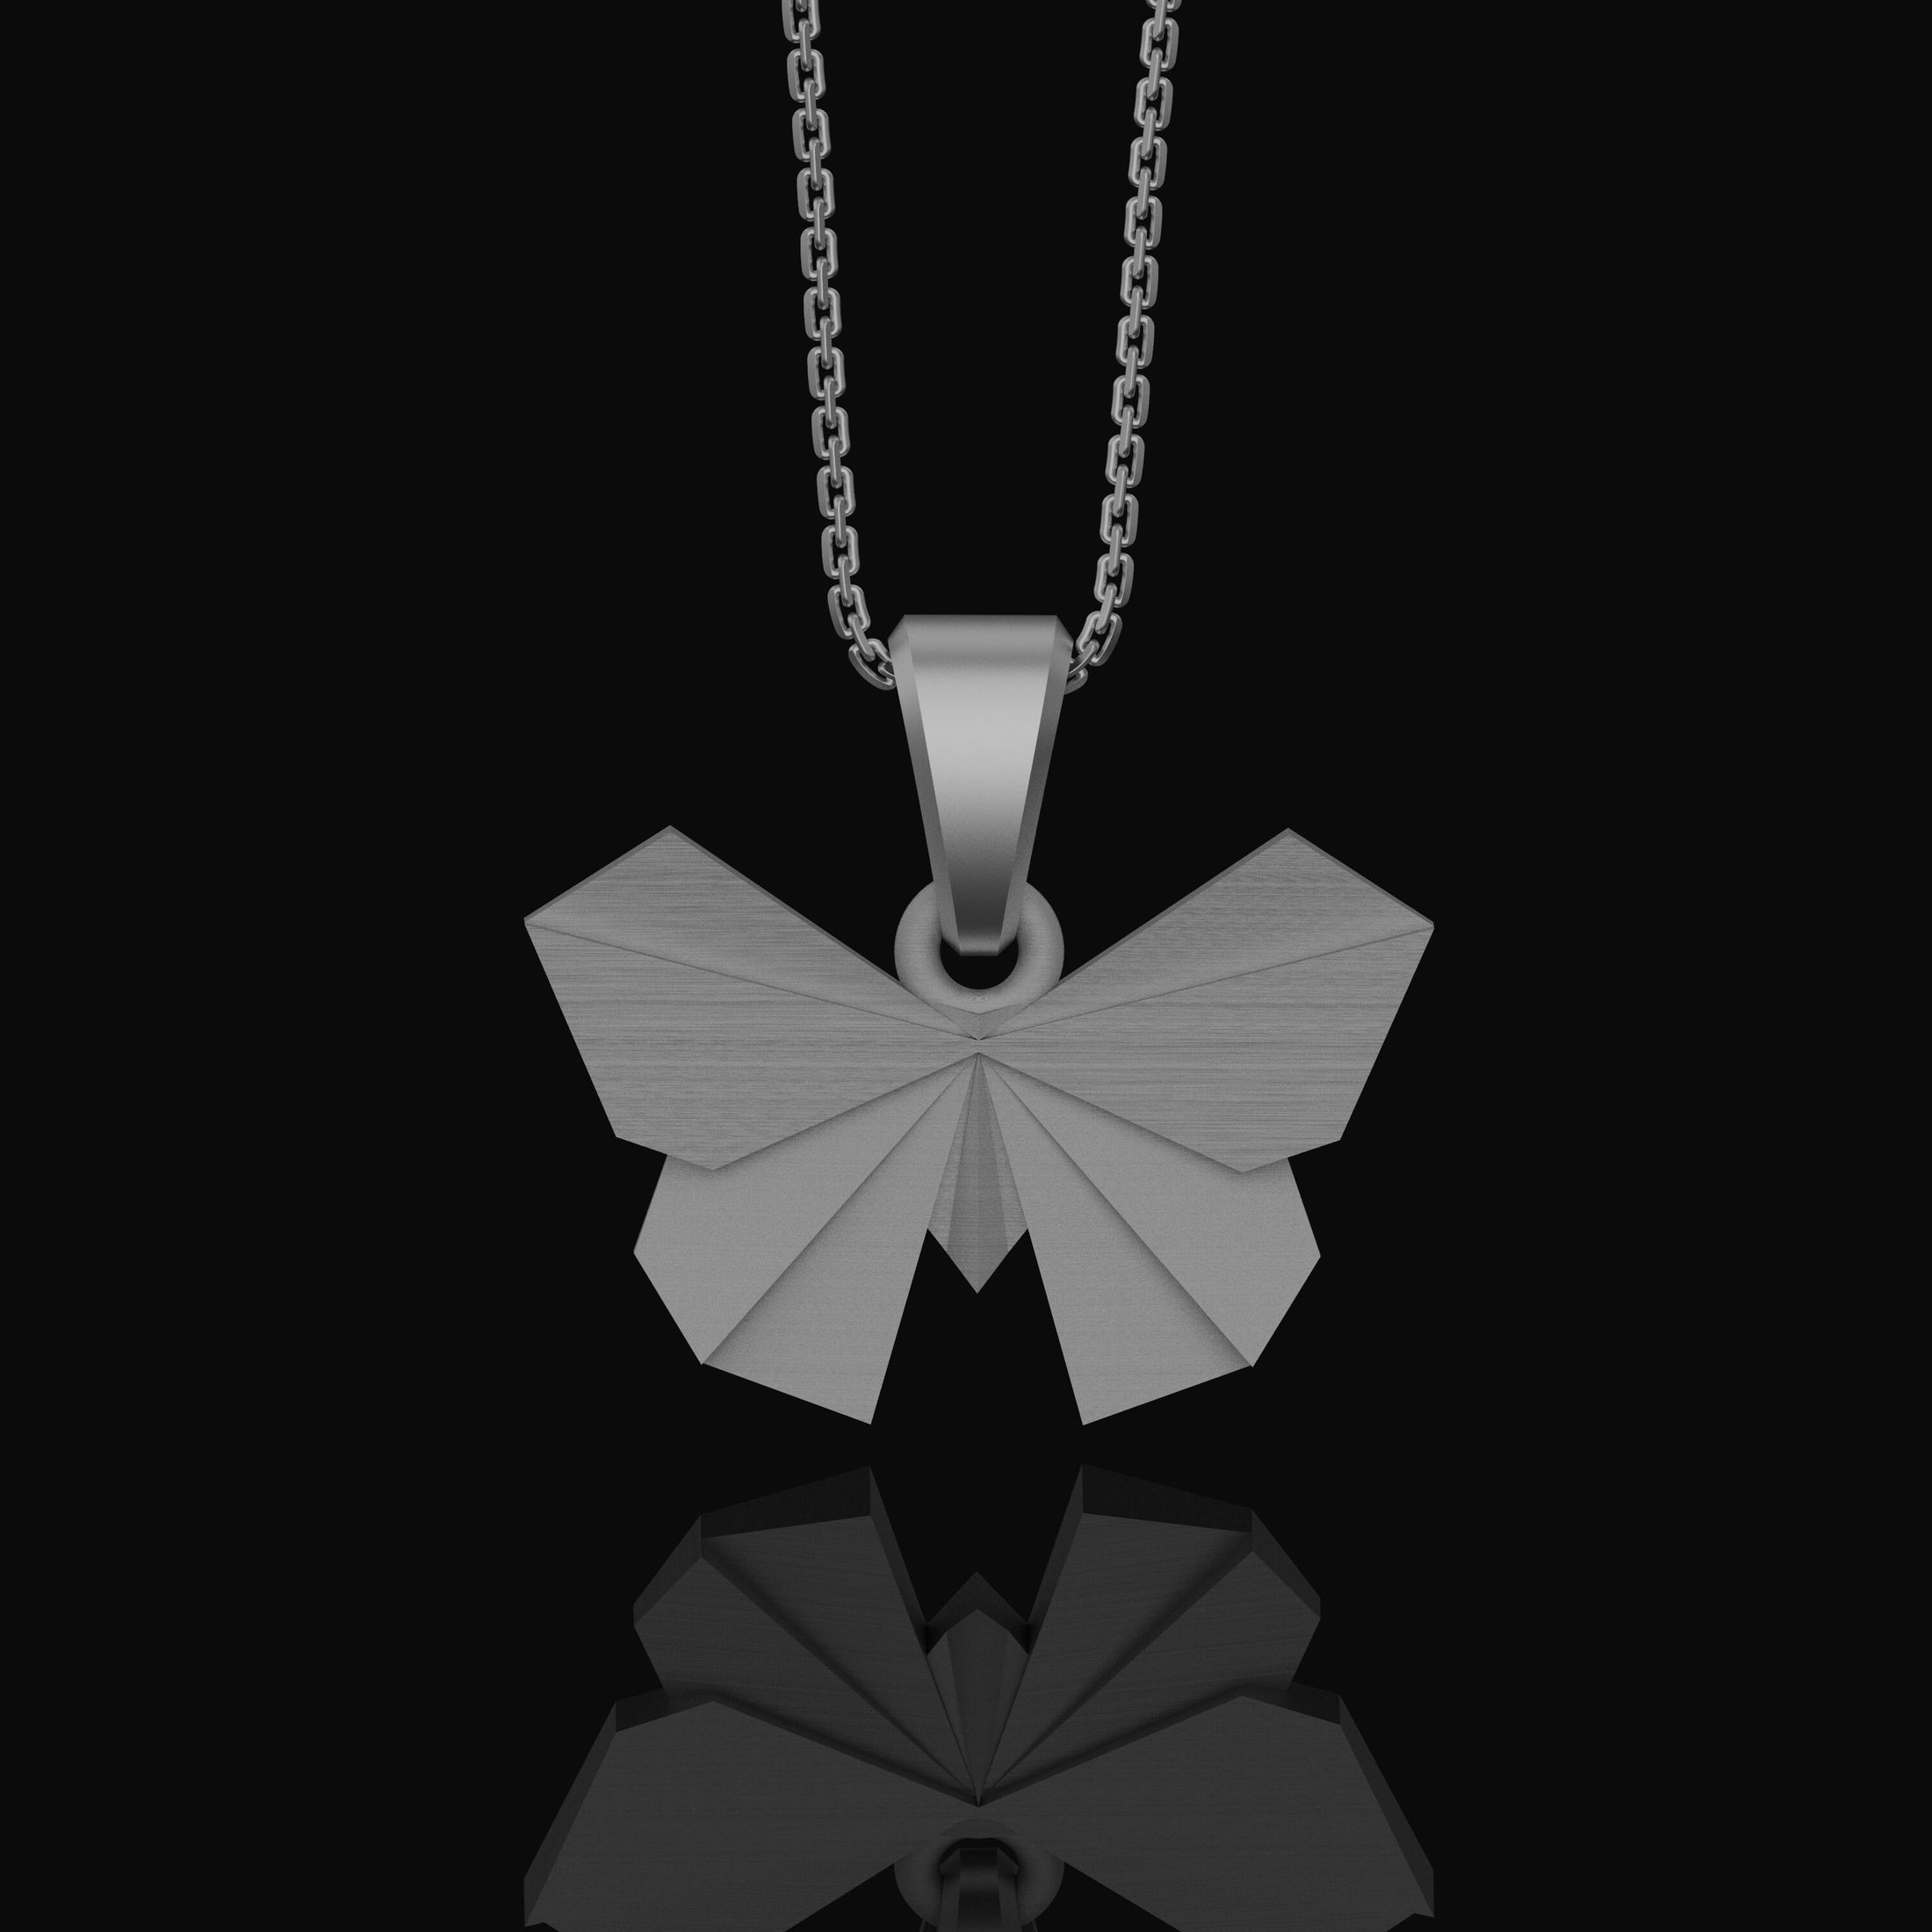 Silver Origami Butterfly Necklace - Elegant Folded Charm, Artistic Nature Jewelry, Perfect Delicate Gift for Her, Chic Feminine Pendant